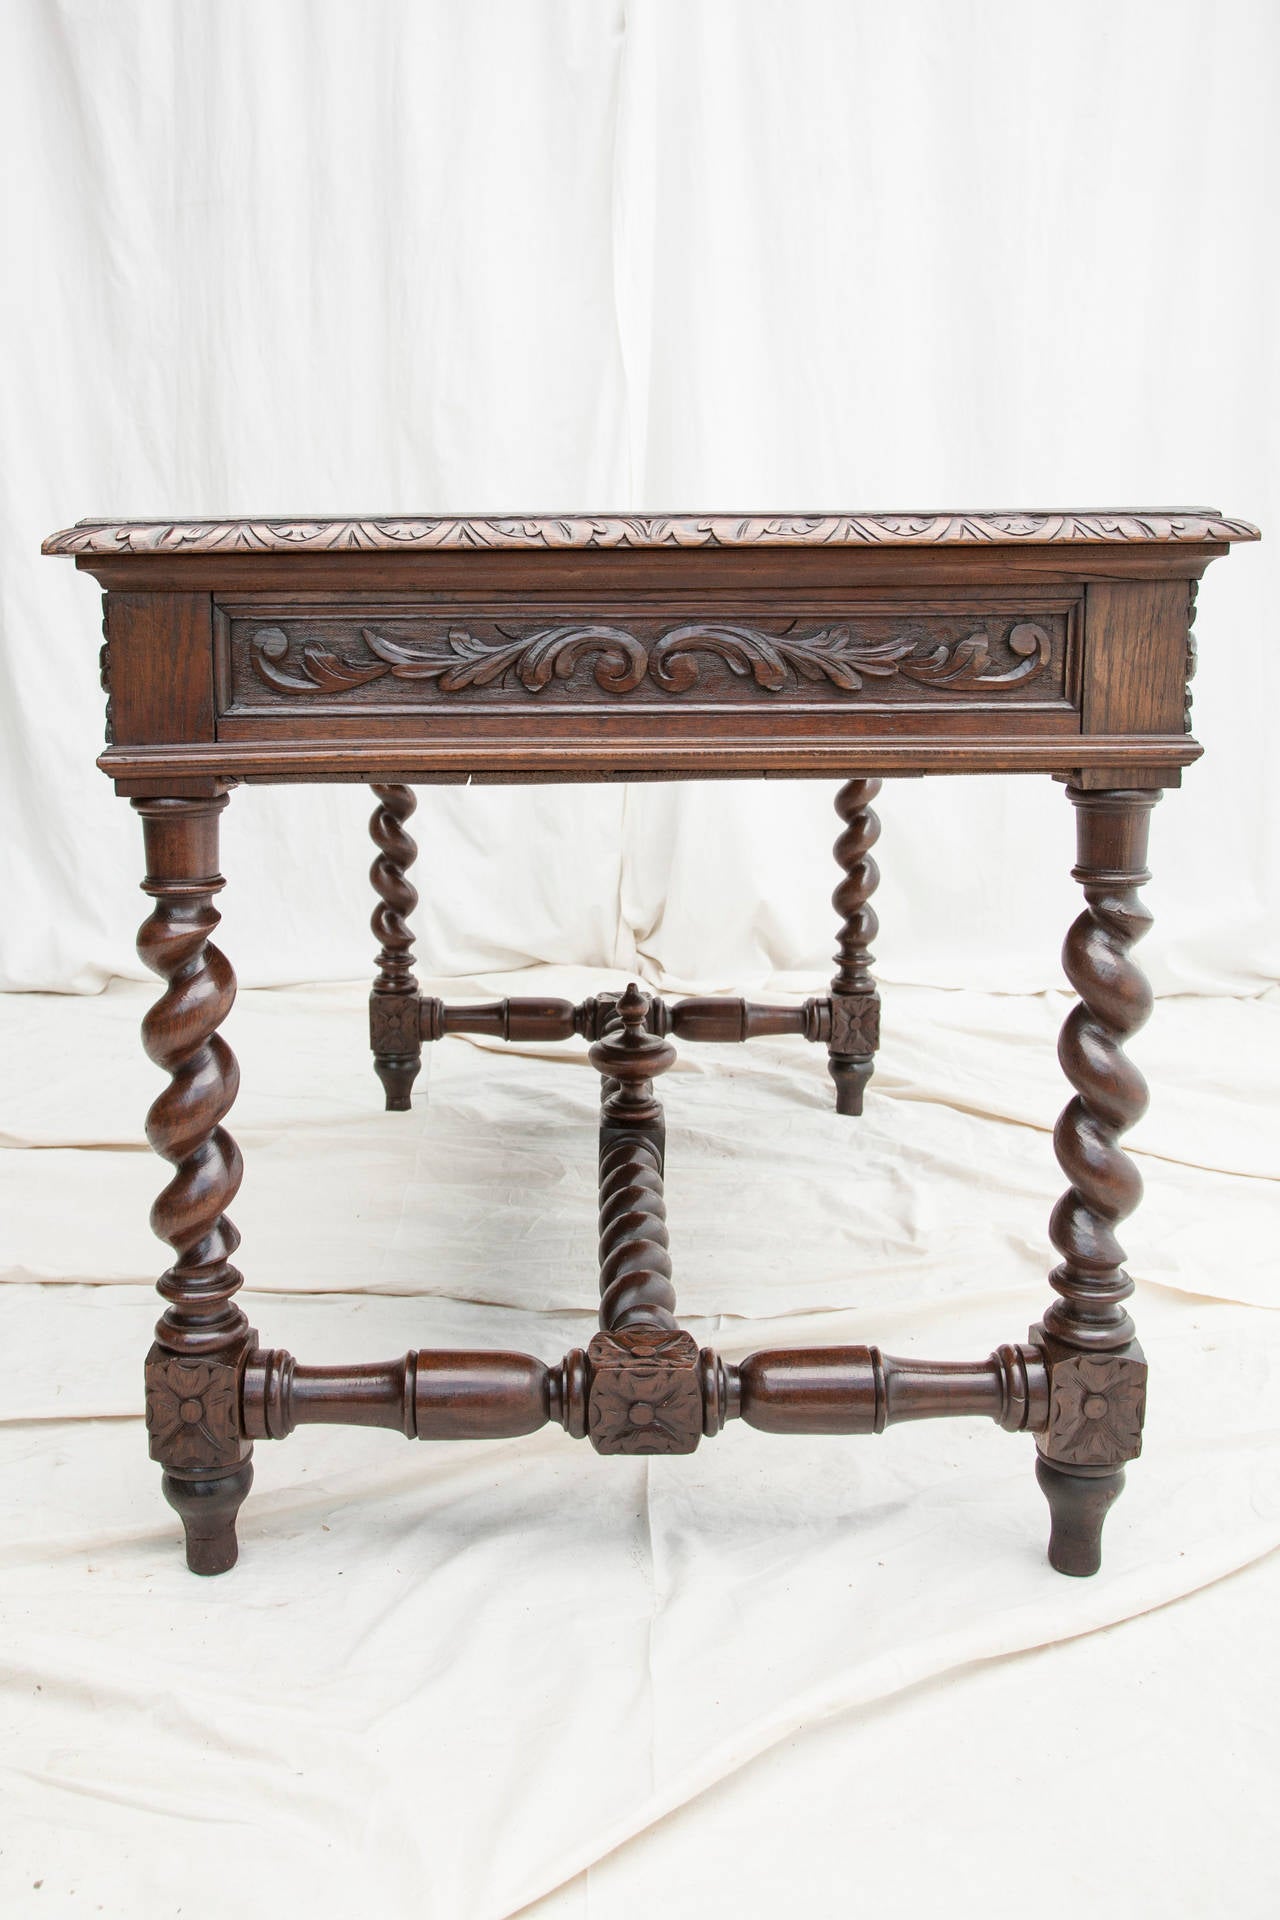 An exquisite example of the Louis XIII style, this hand carved oak desk features barley twist legs, gargoyle pulls, and elaborate scrolling leaf work on all sides. Three functioning drawers on one side and three false drawers on the opposite side